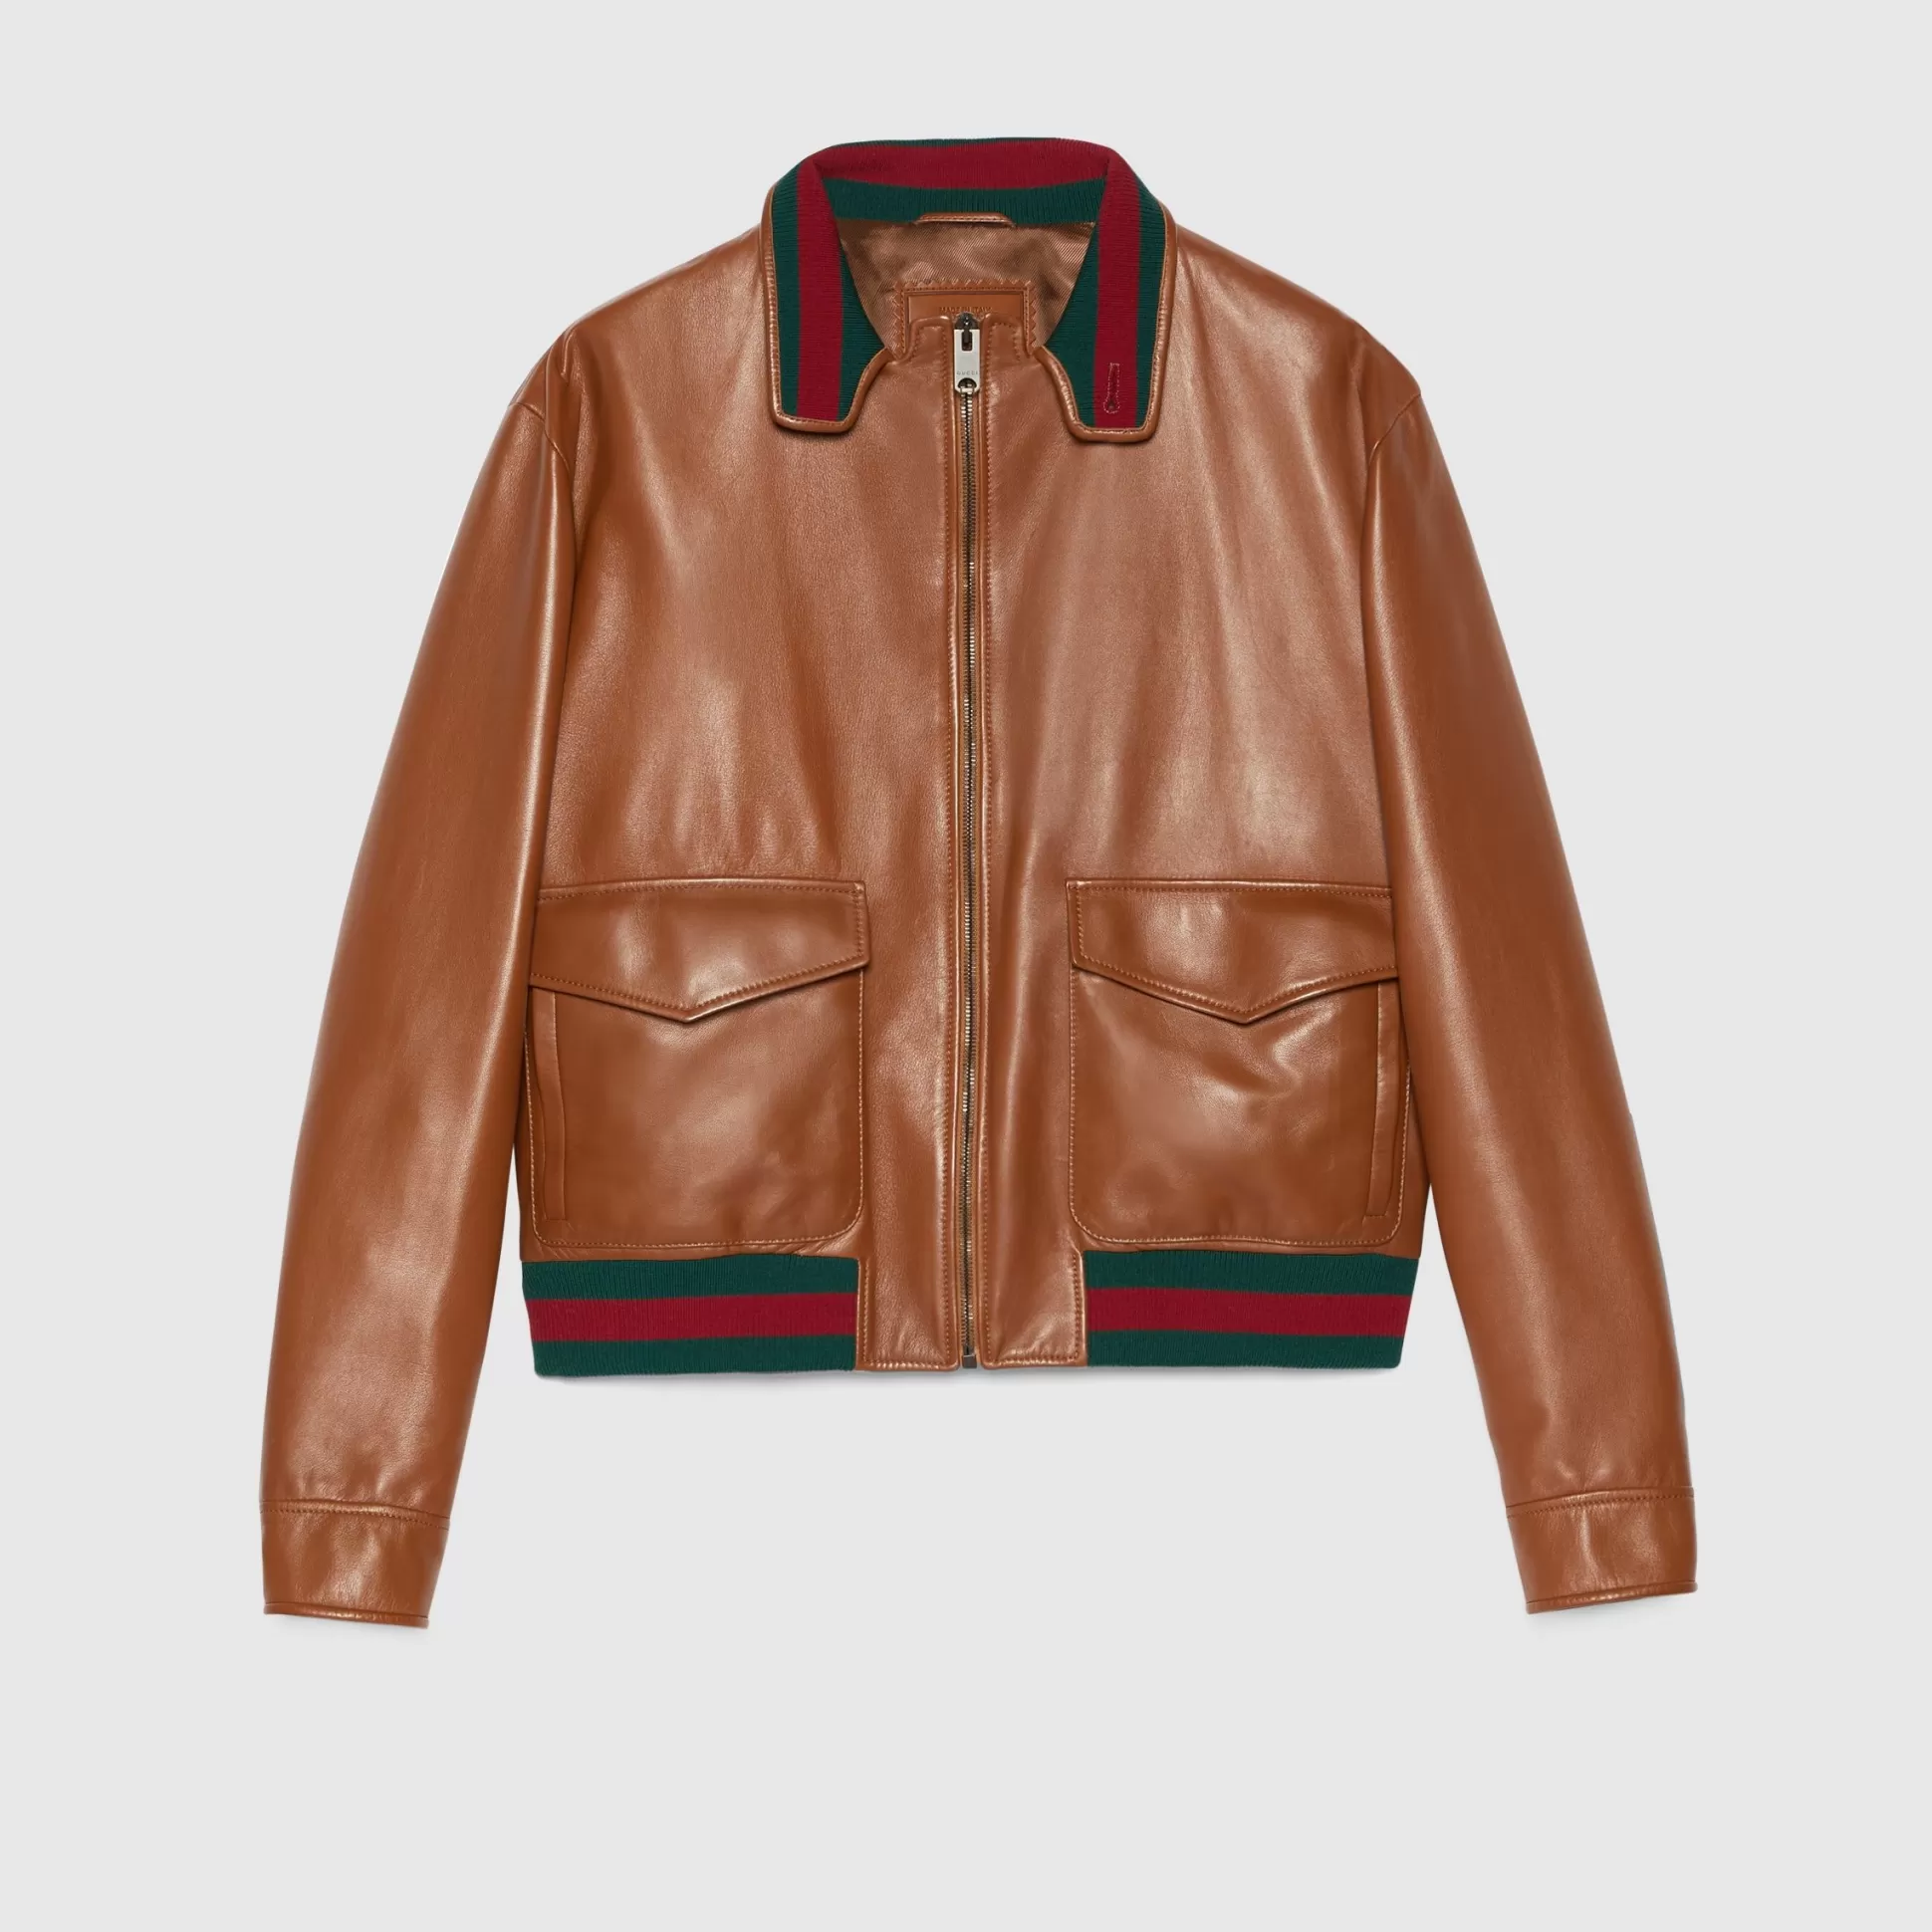 GUCCI Leather Bomber Jacket-Men Leather